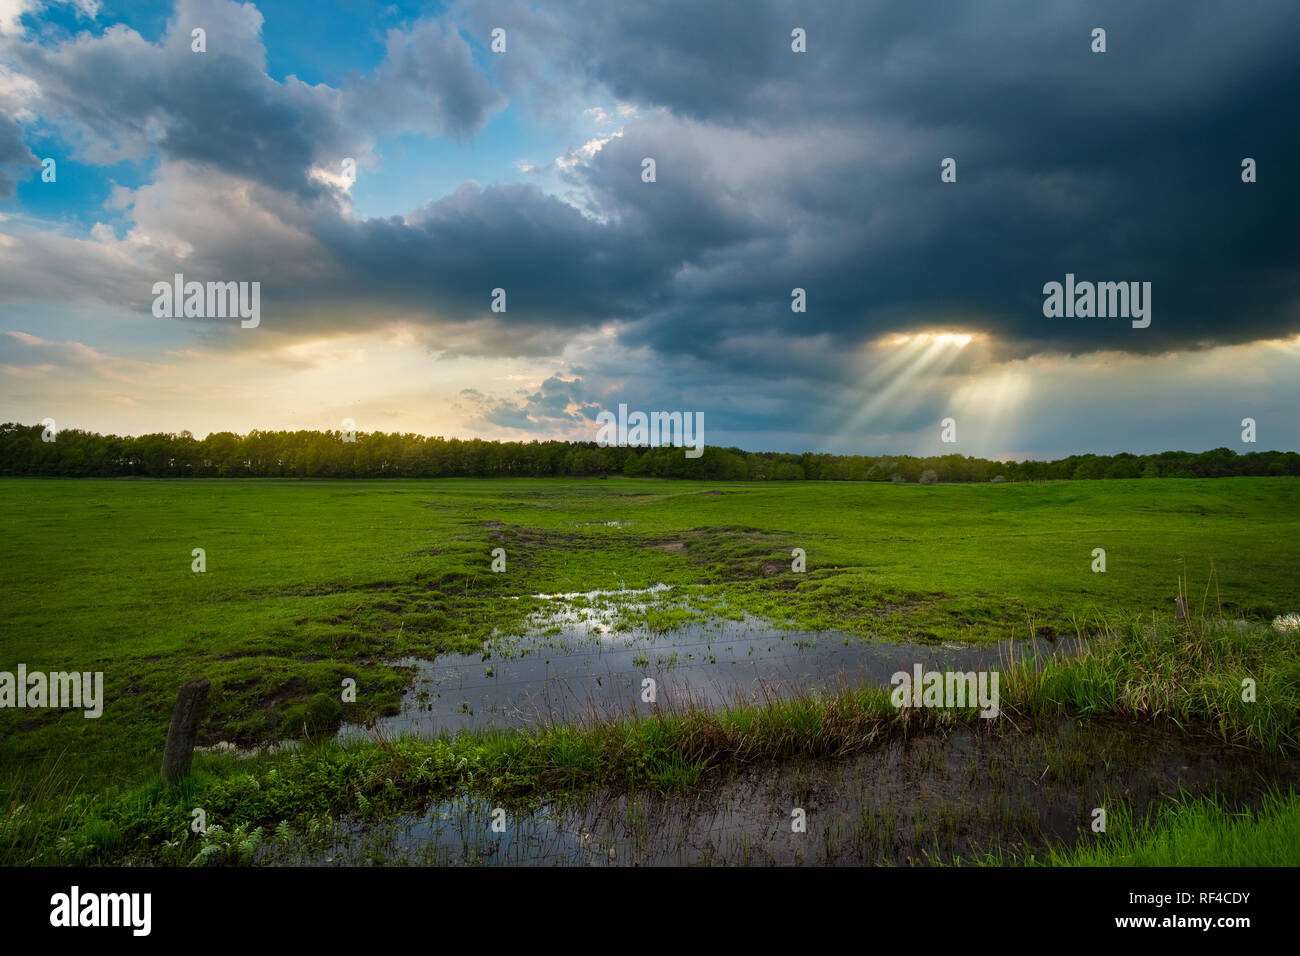 Sunrays over the stormy field Stock Photo